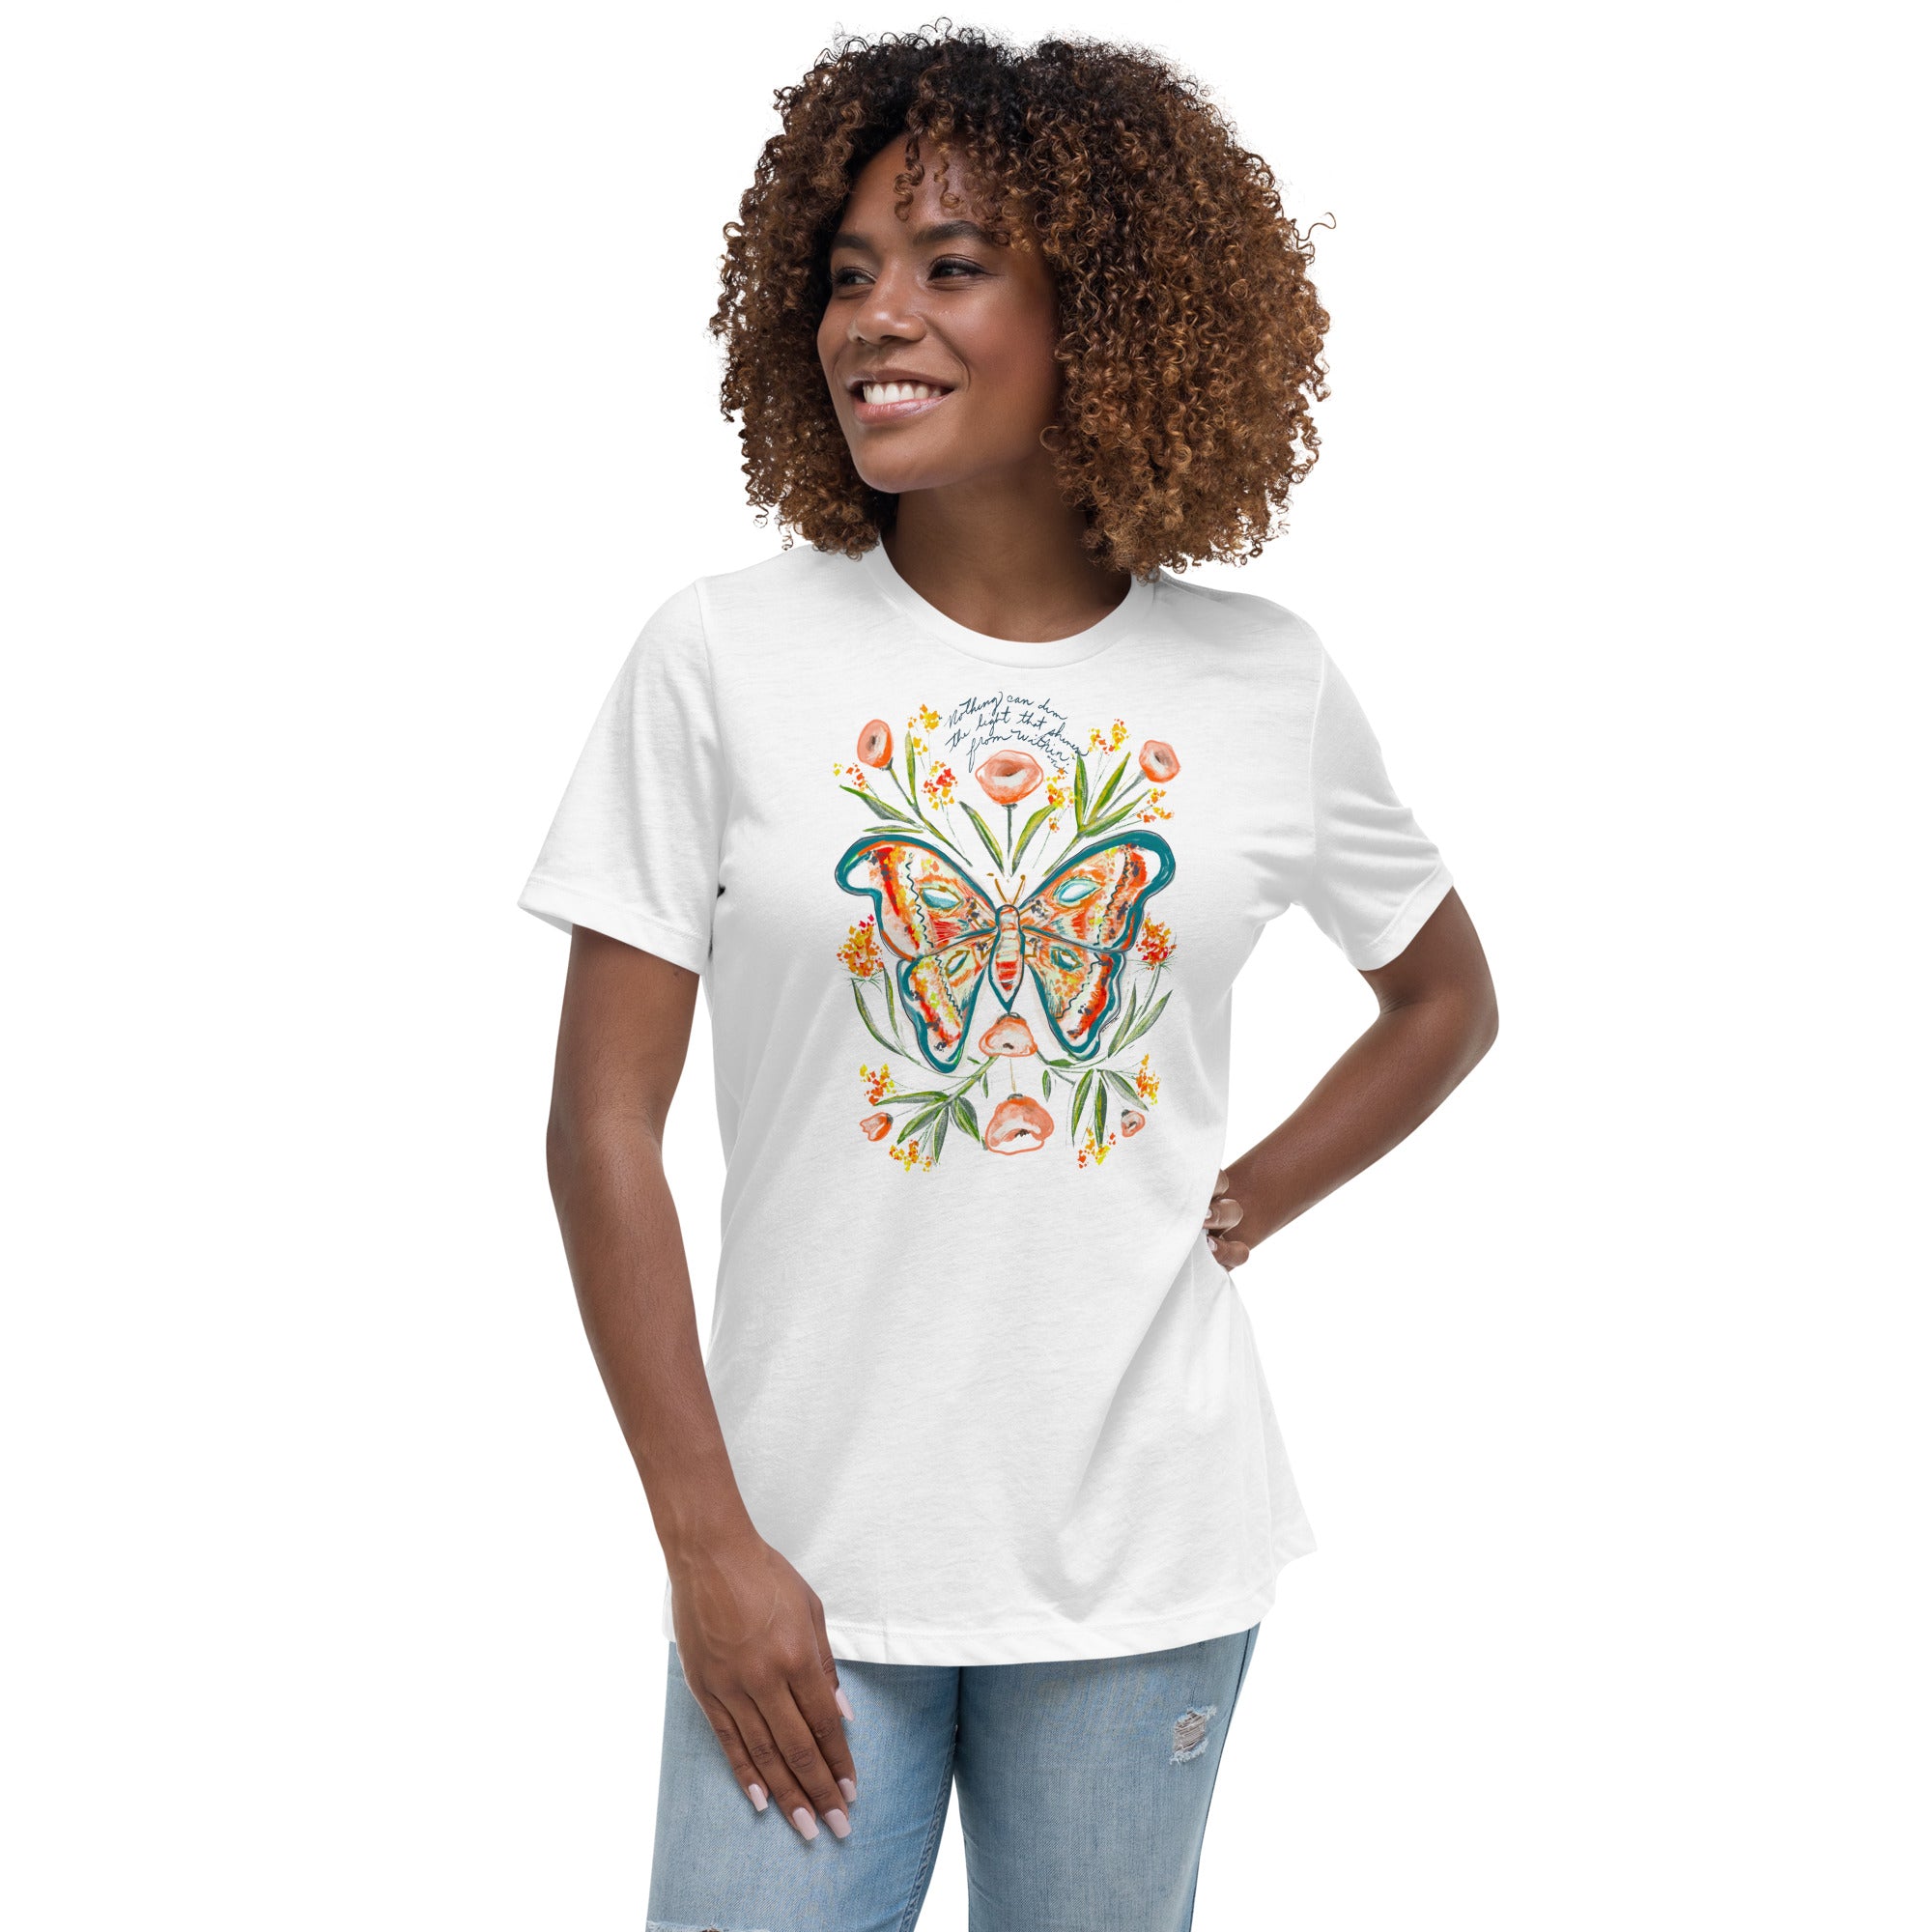 butterfly t-shirt,Buy Butterfly T-Shirt Online - Colorful and Eye-Catching Tee | Free Shipping